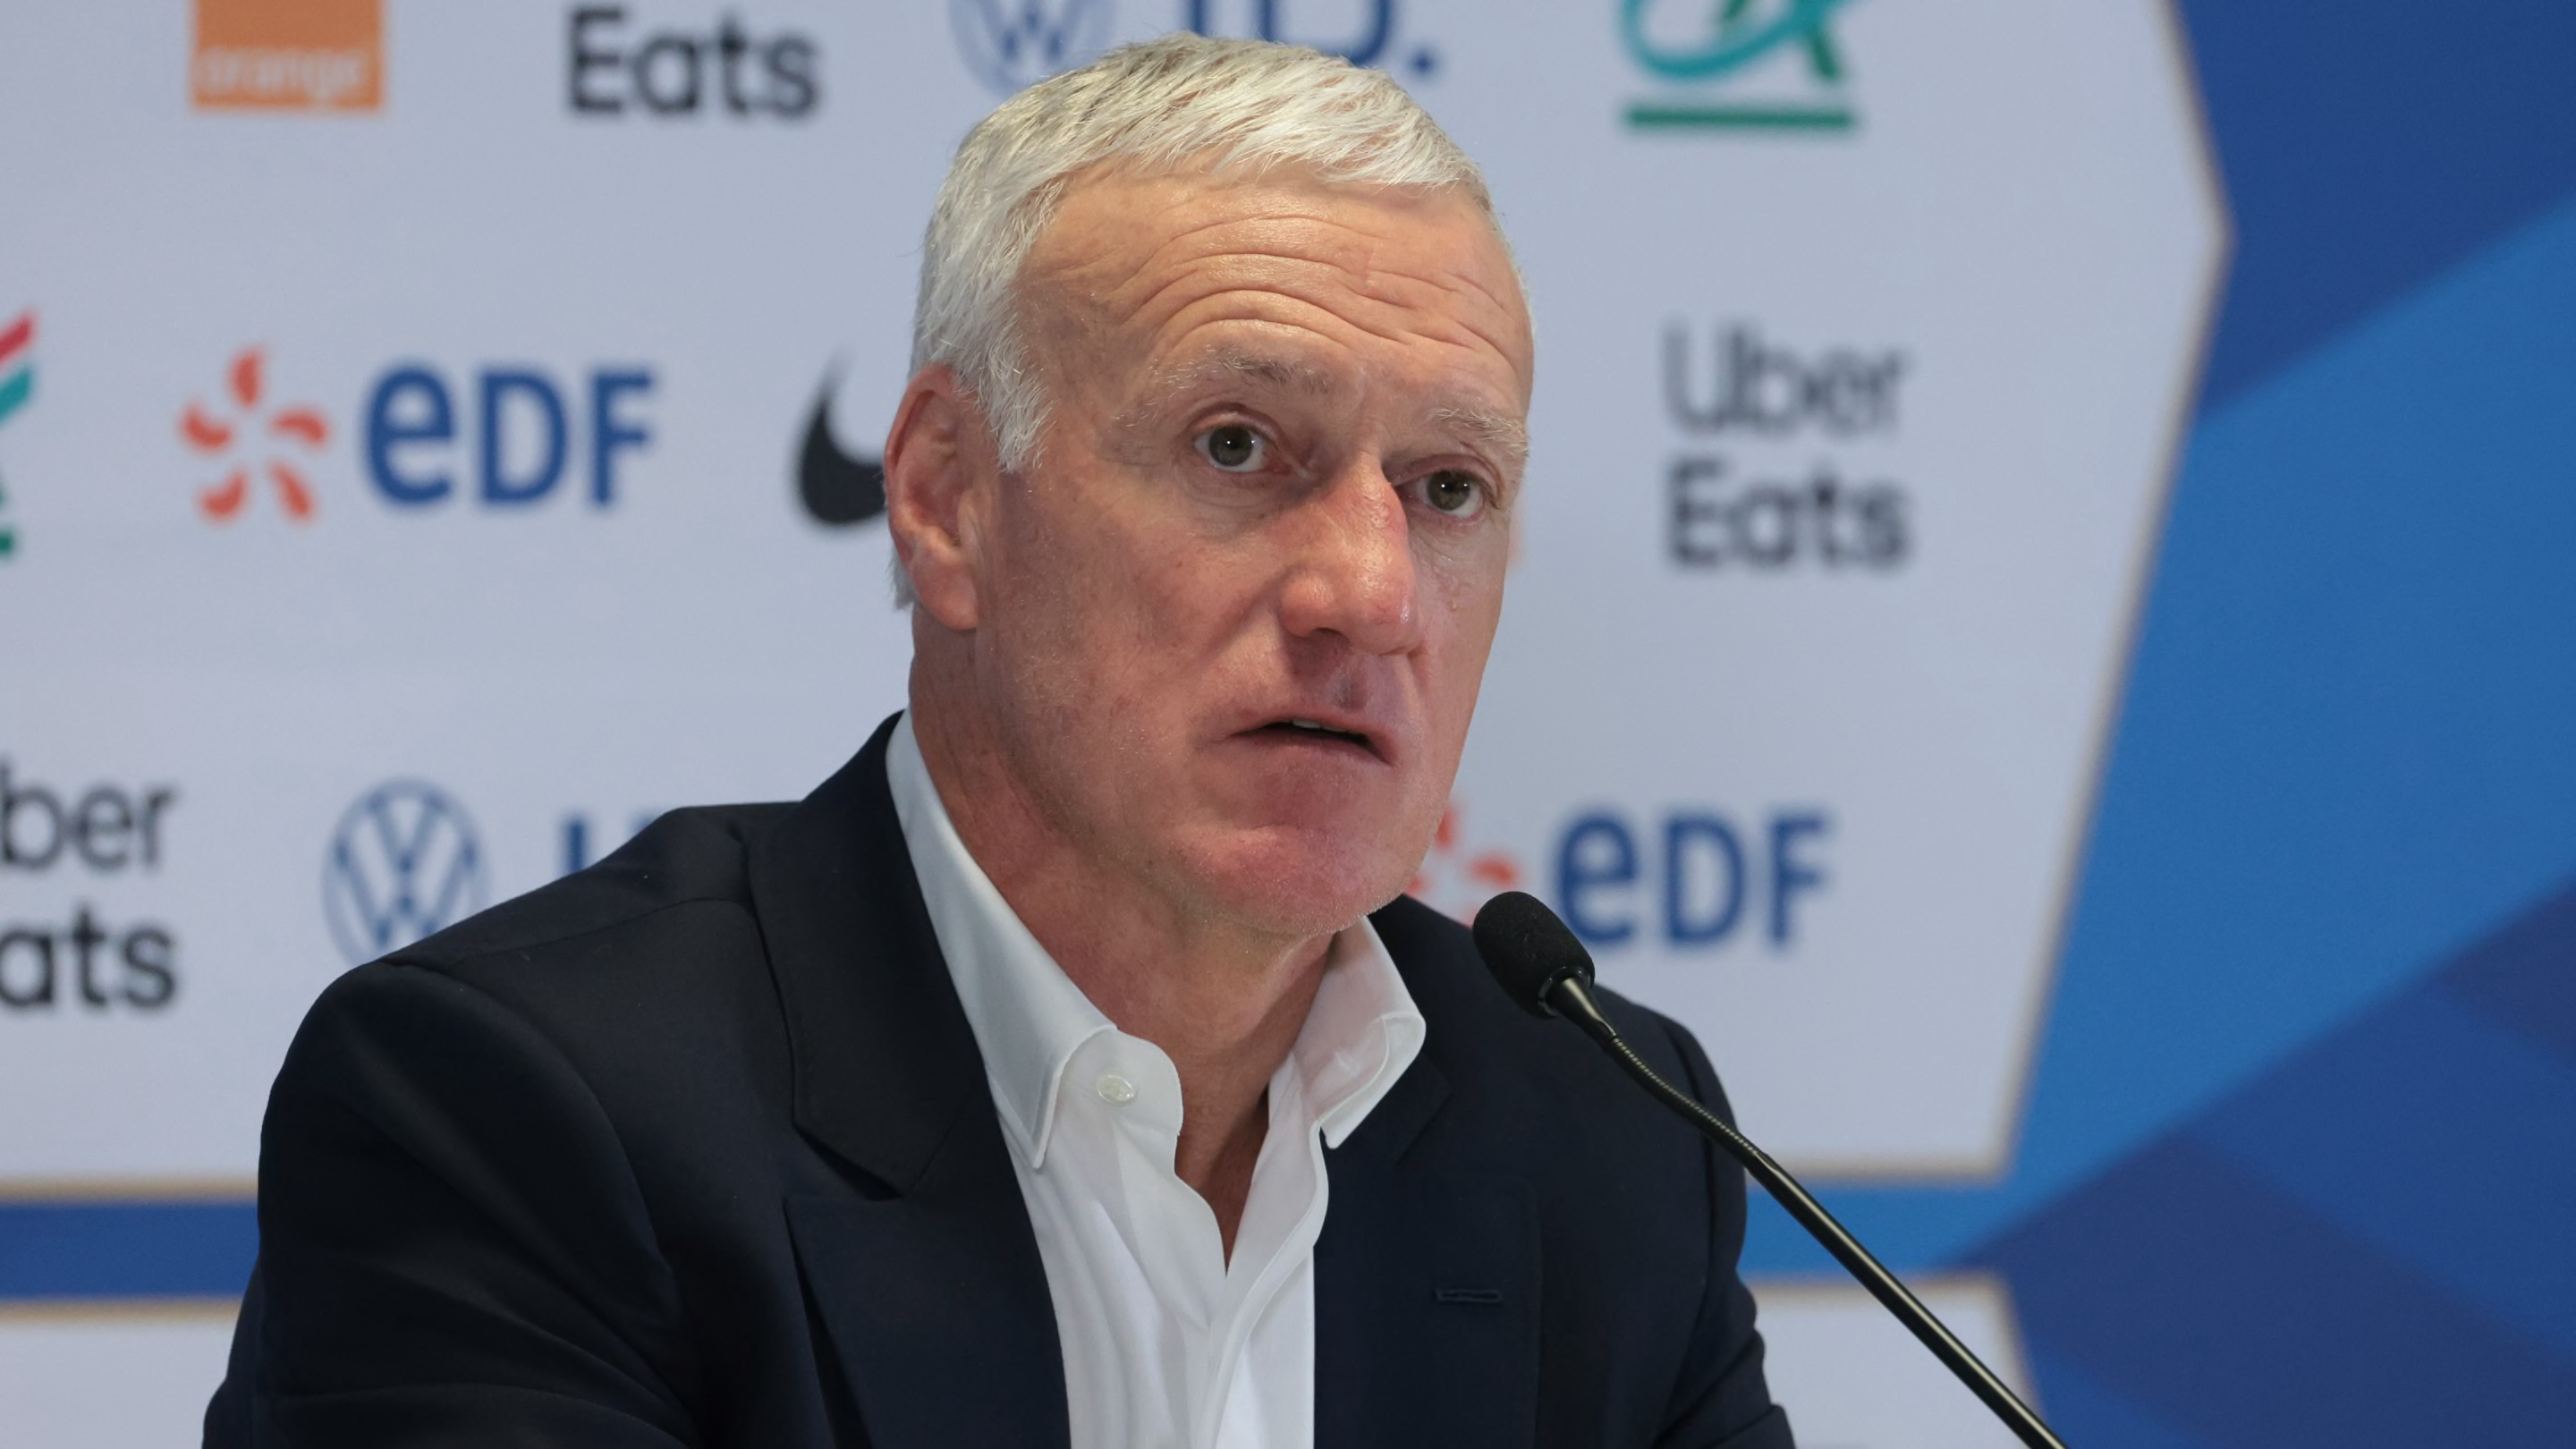 Didier Deschamps names shock recall in France's Euro 2024 squad